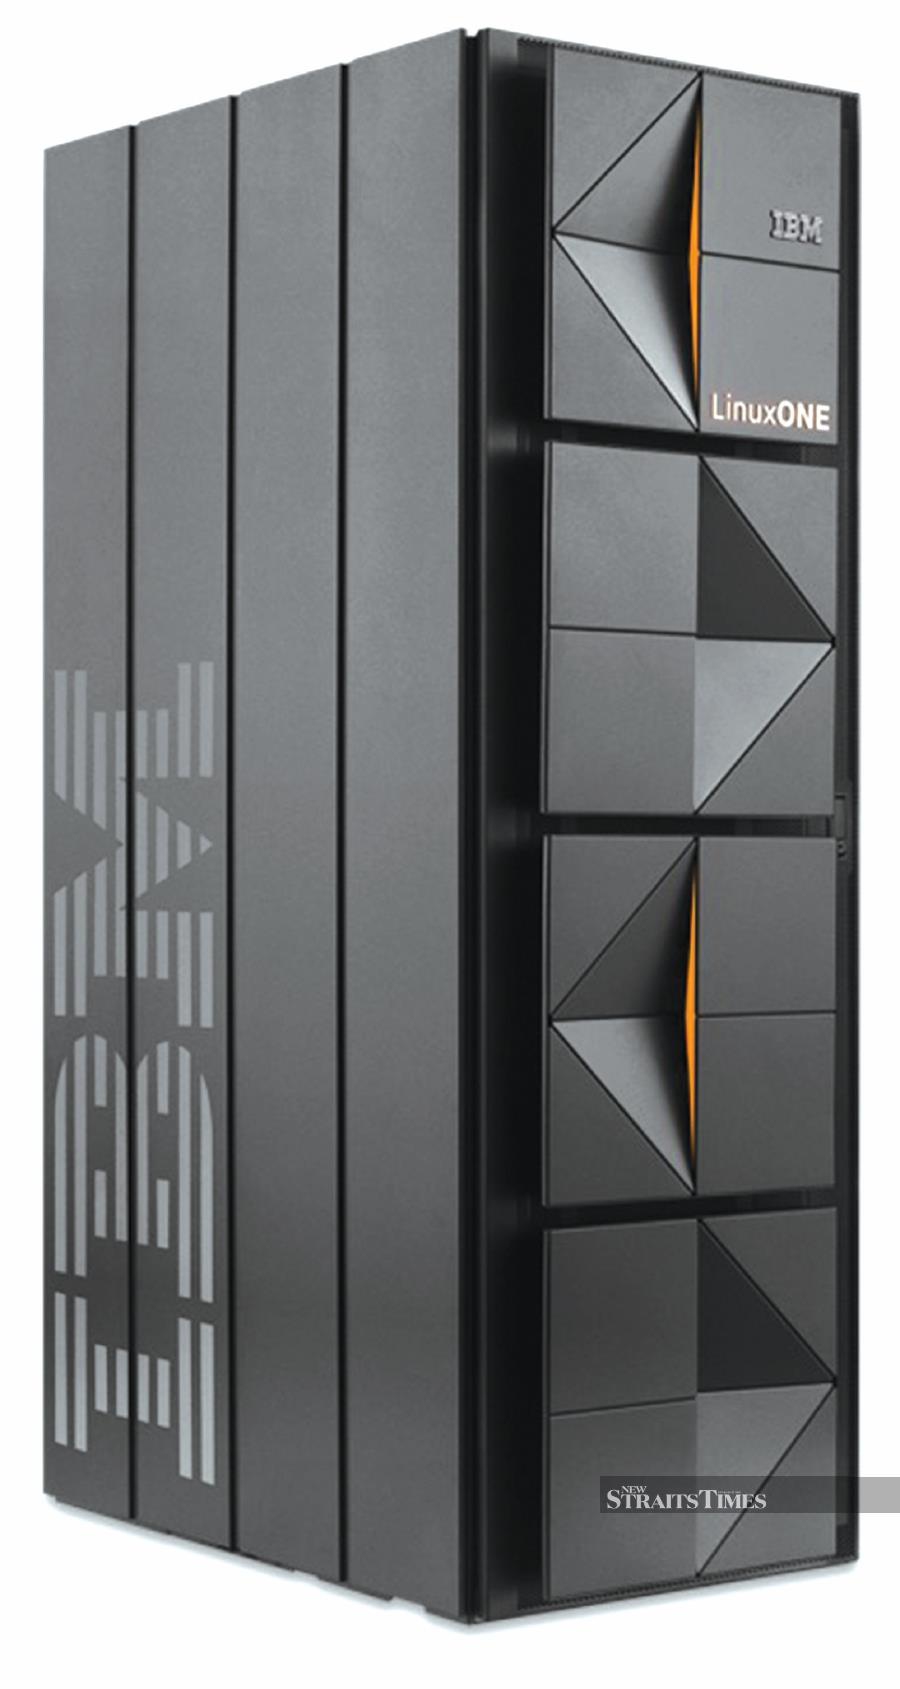 Partition-level power monitoring and environmental metrics on IBM LinuxONE also help to reduce users’ carbon footprint.